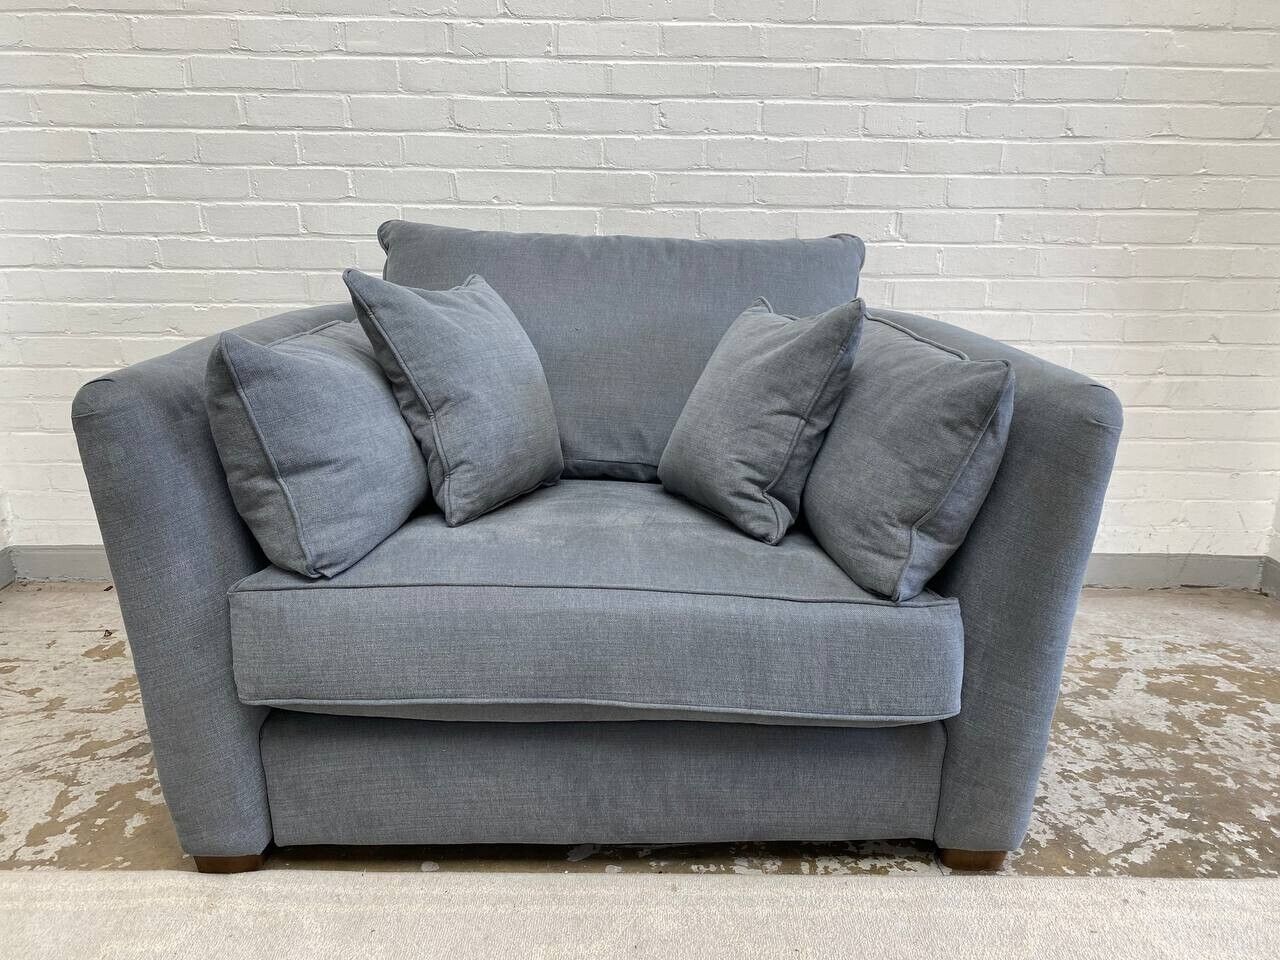 Collins & Hayes Maple Snuggler Chair/loveseat Grey